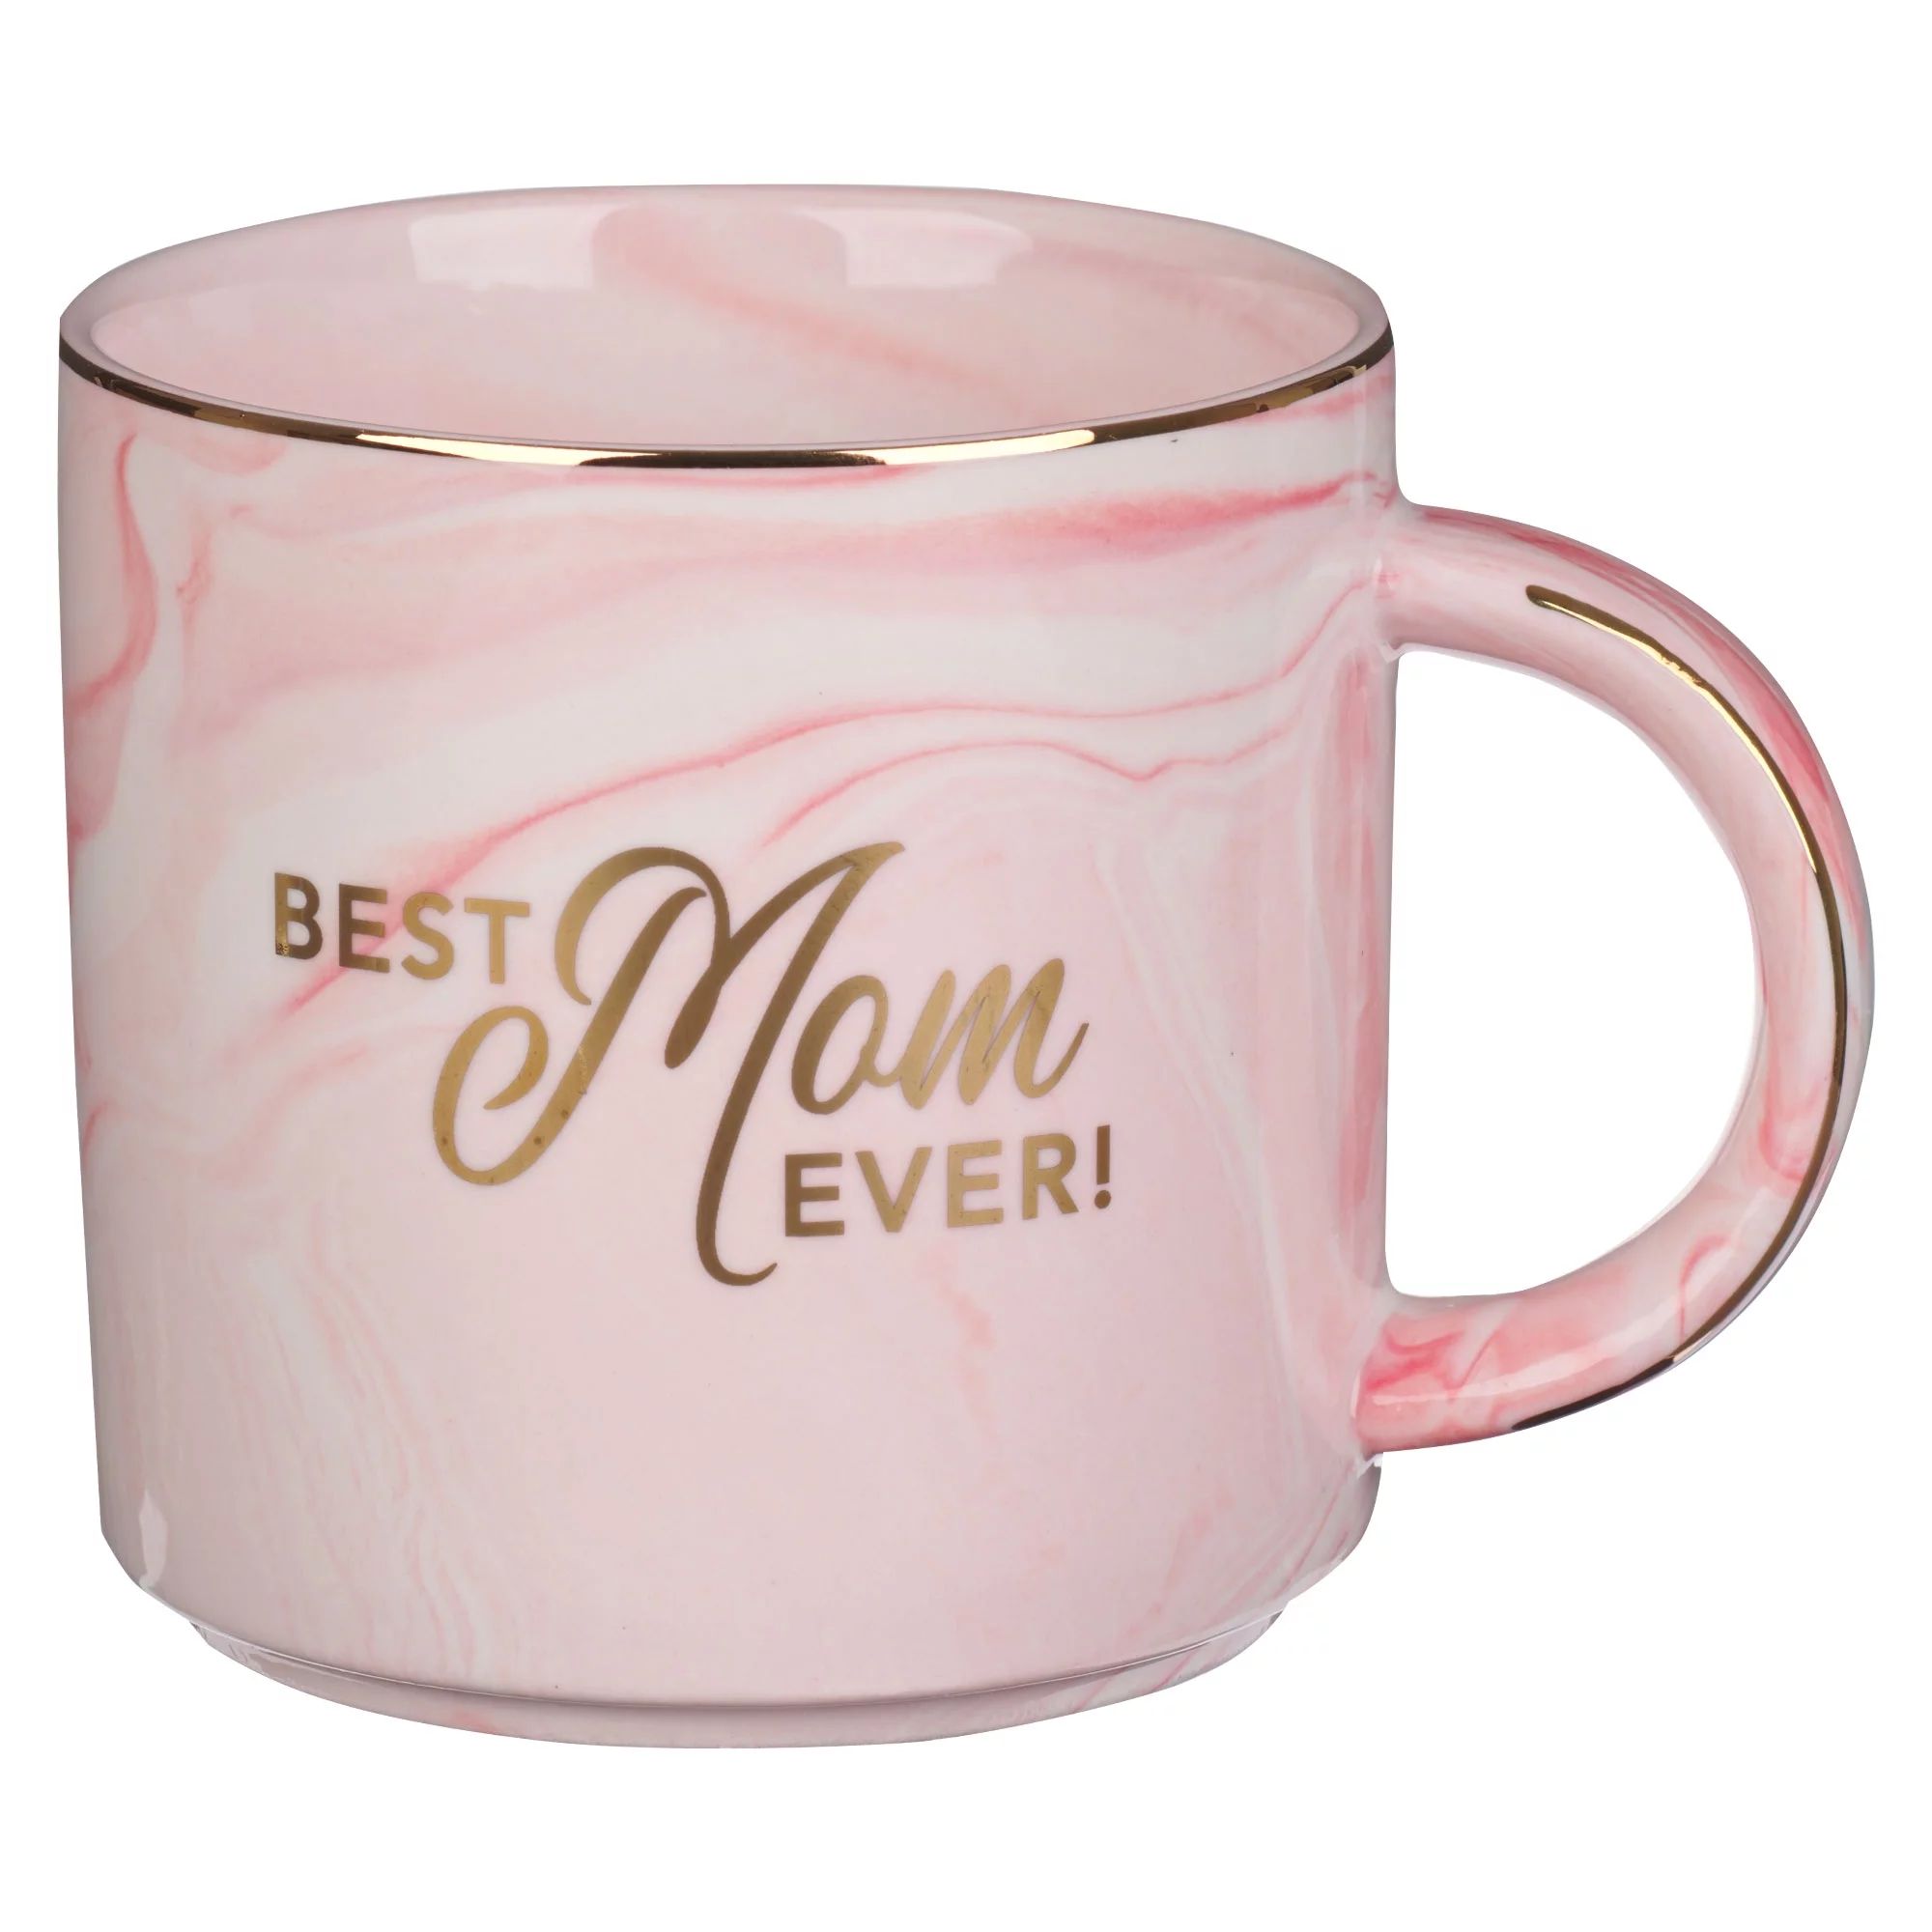 With Love Coffee Mug Best Mom Ever! Pink Marble Swirl Gold Lettering and Rim Accents Inspirationa... | Walmart (US)